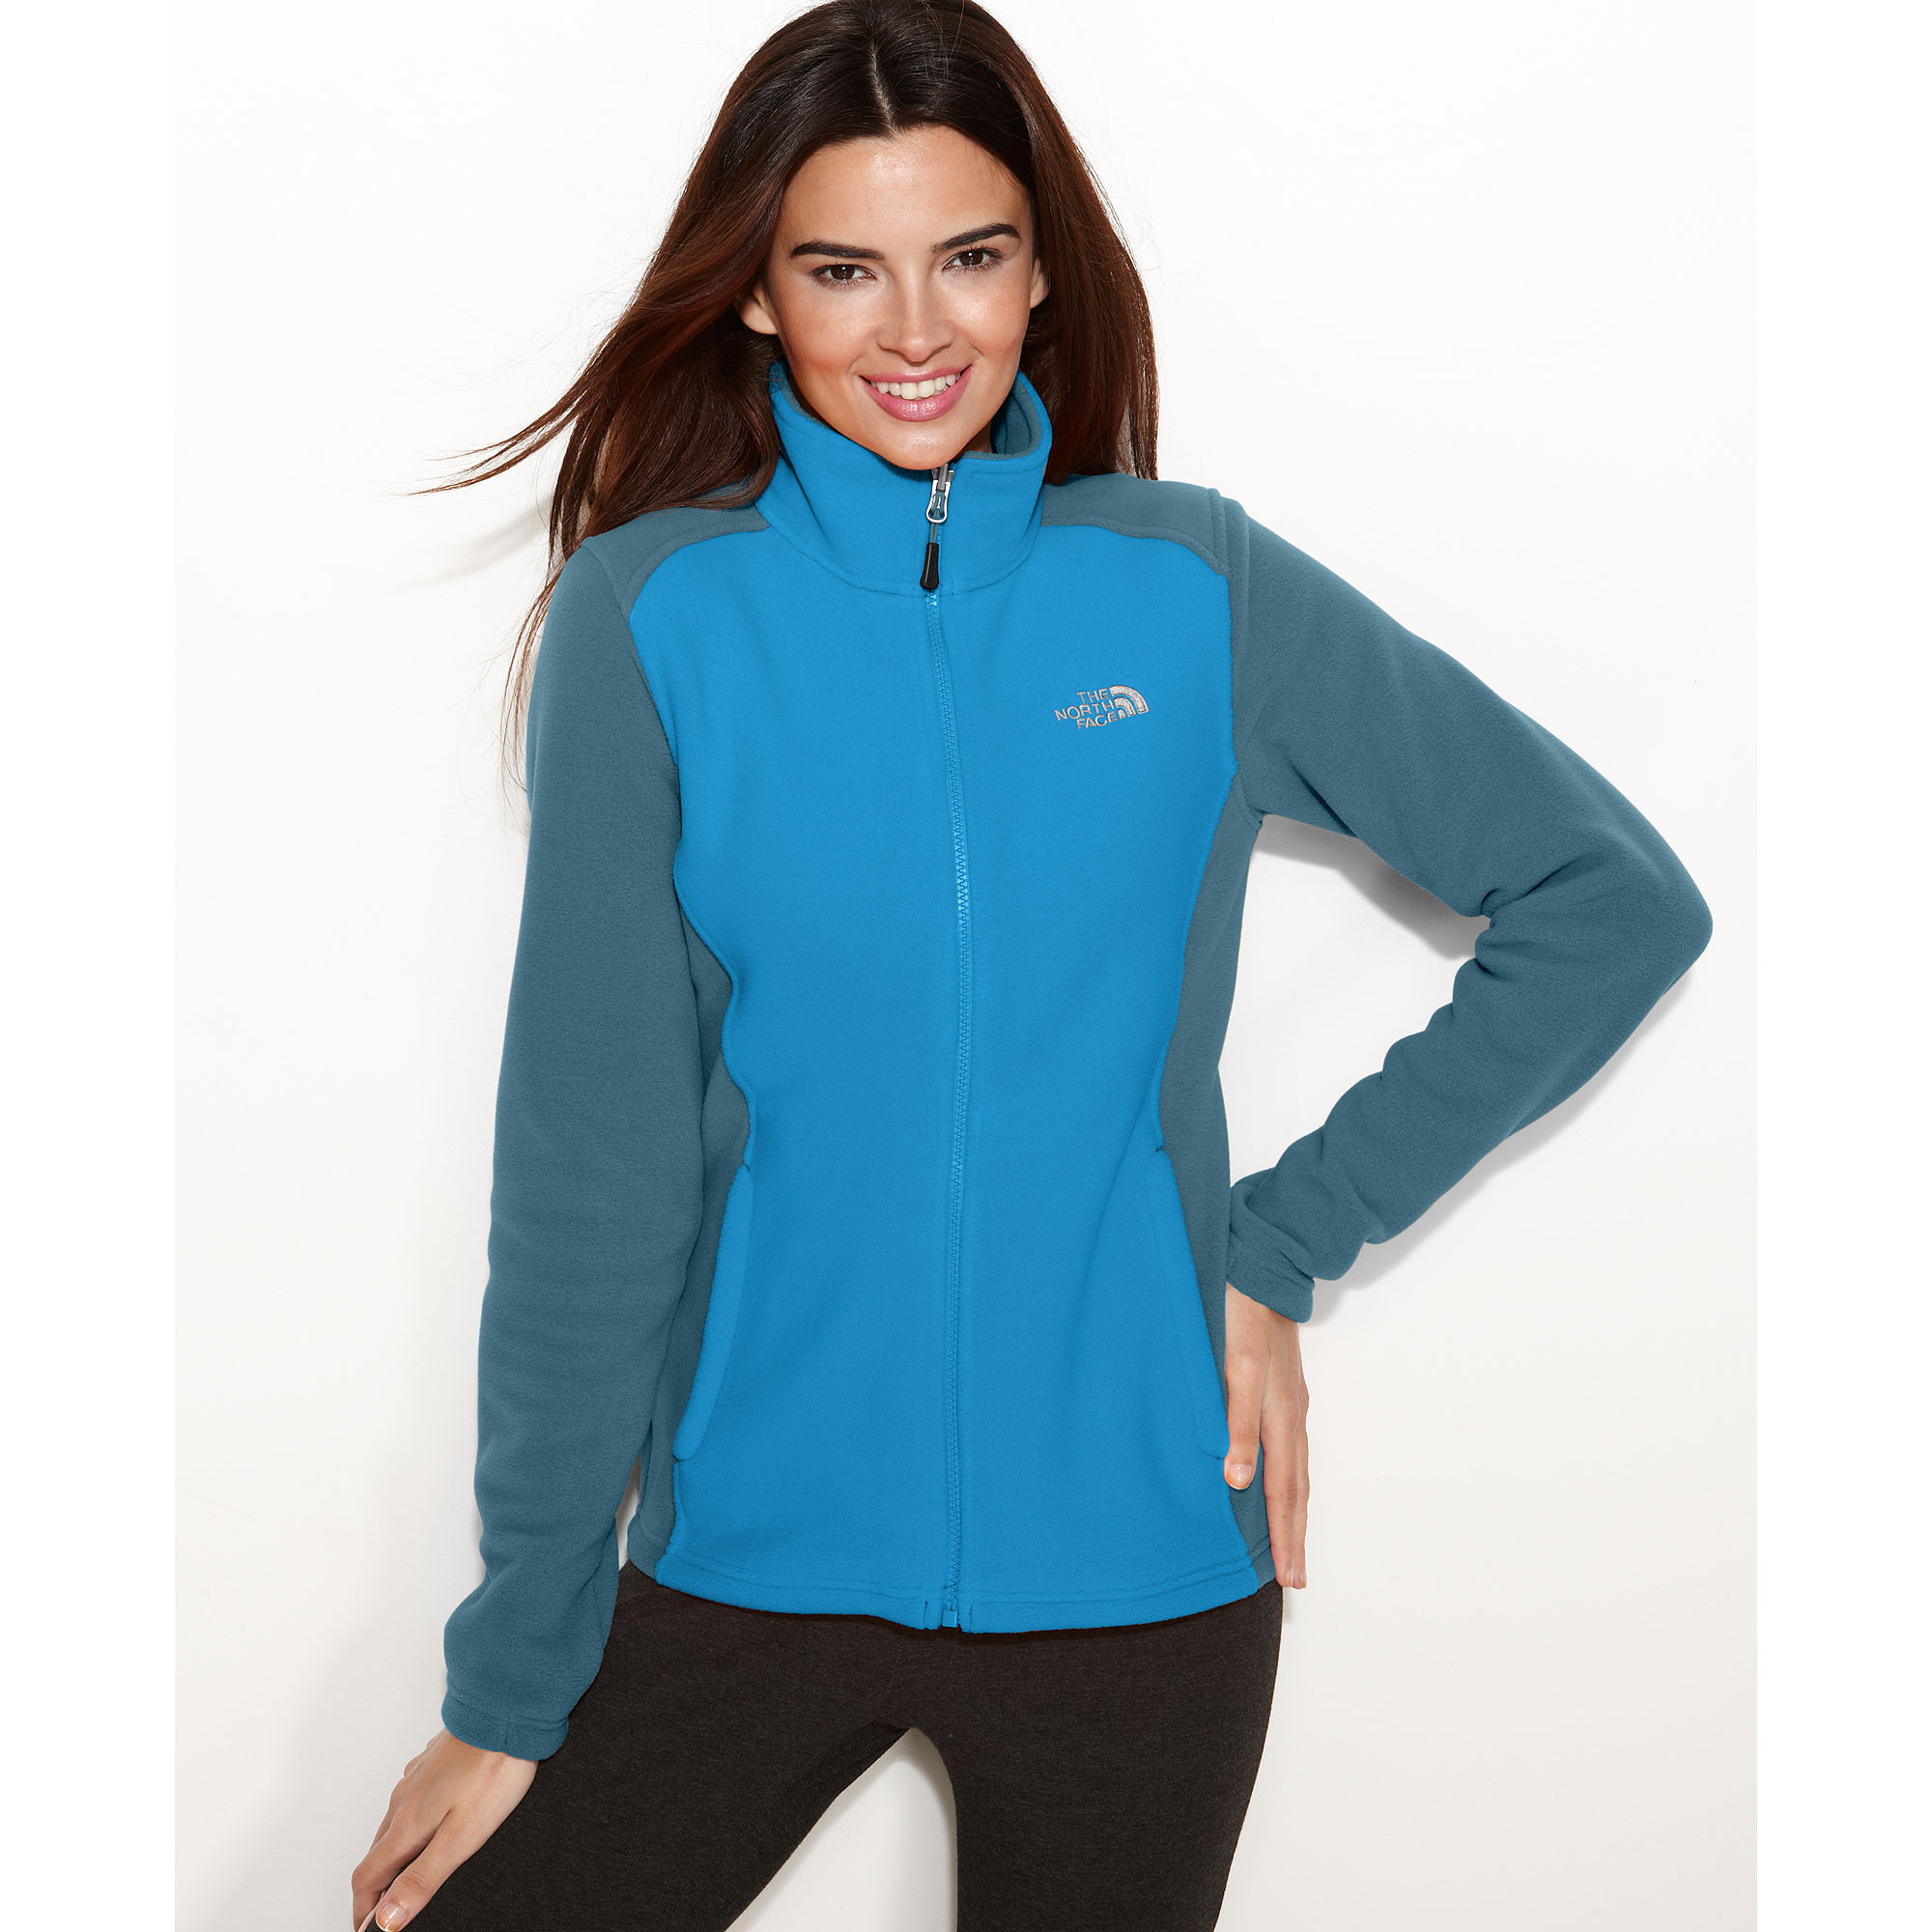 Lyst - The North Face Flashdry Colorblocked Fleece in Blue